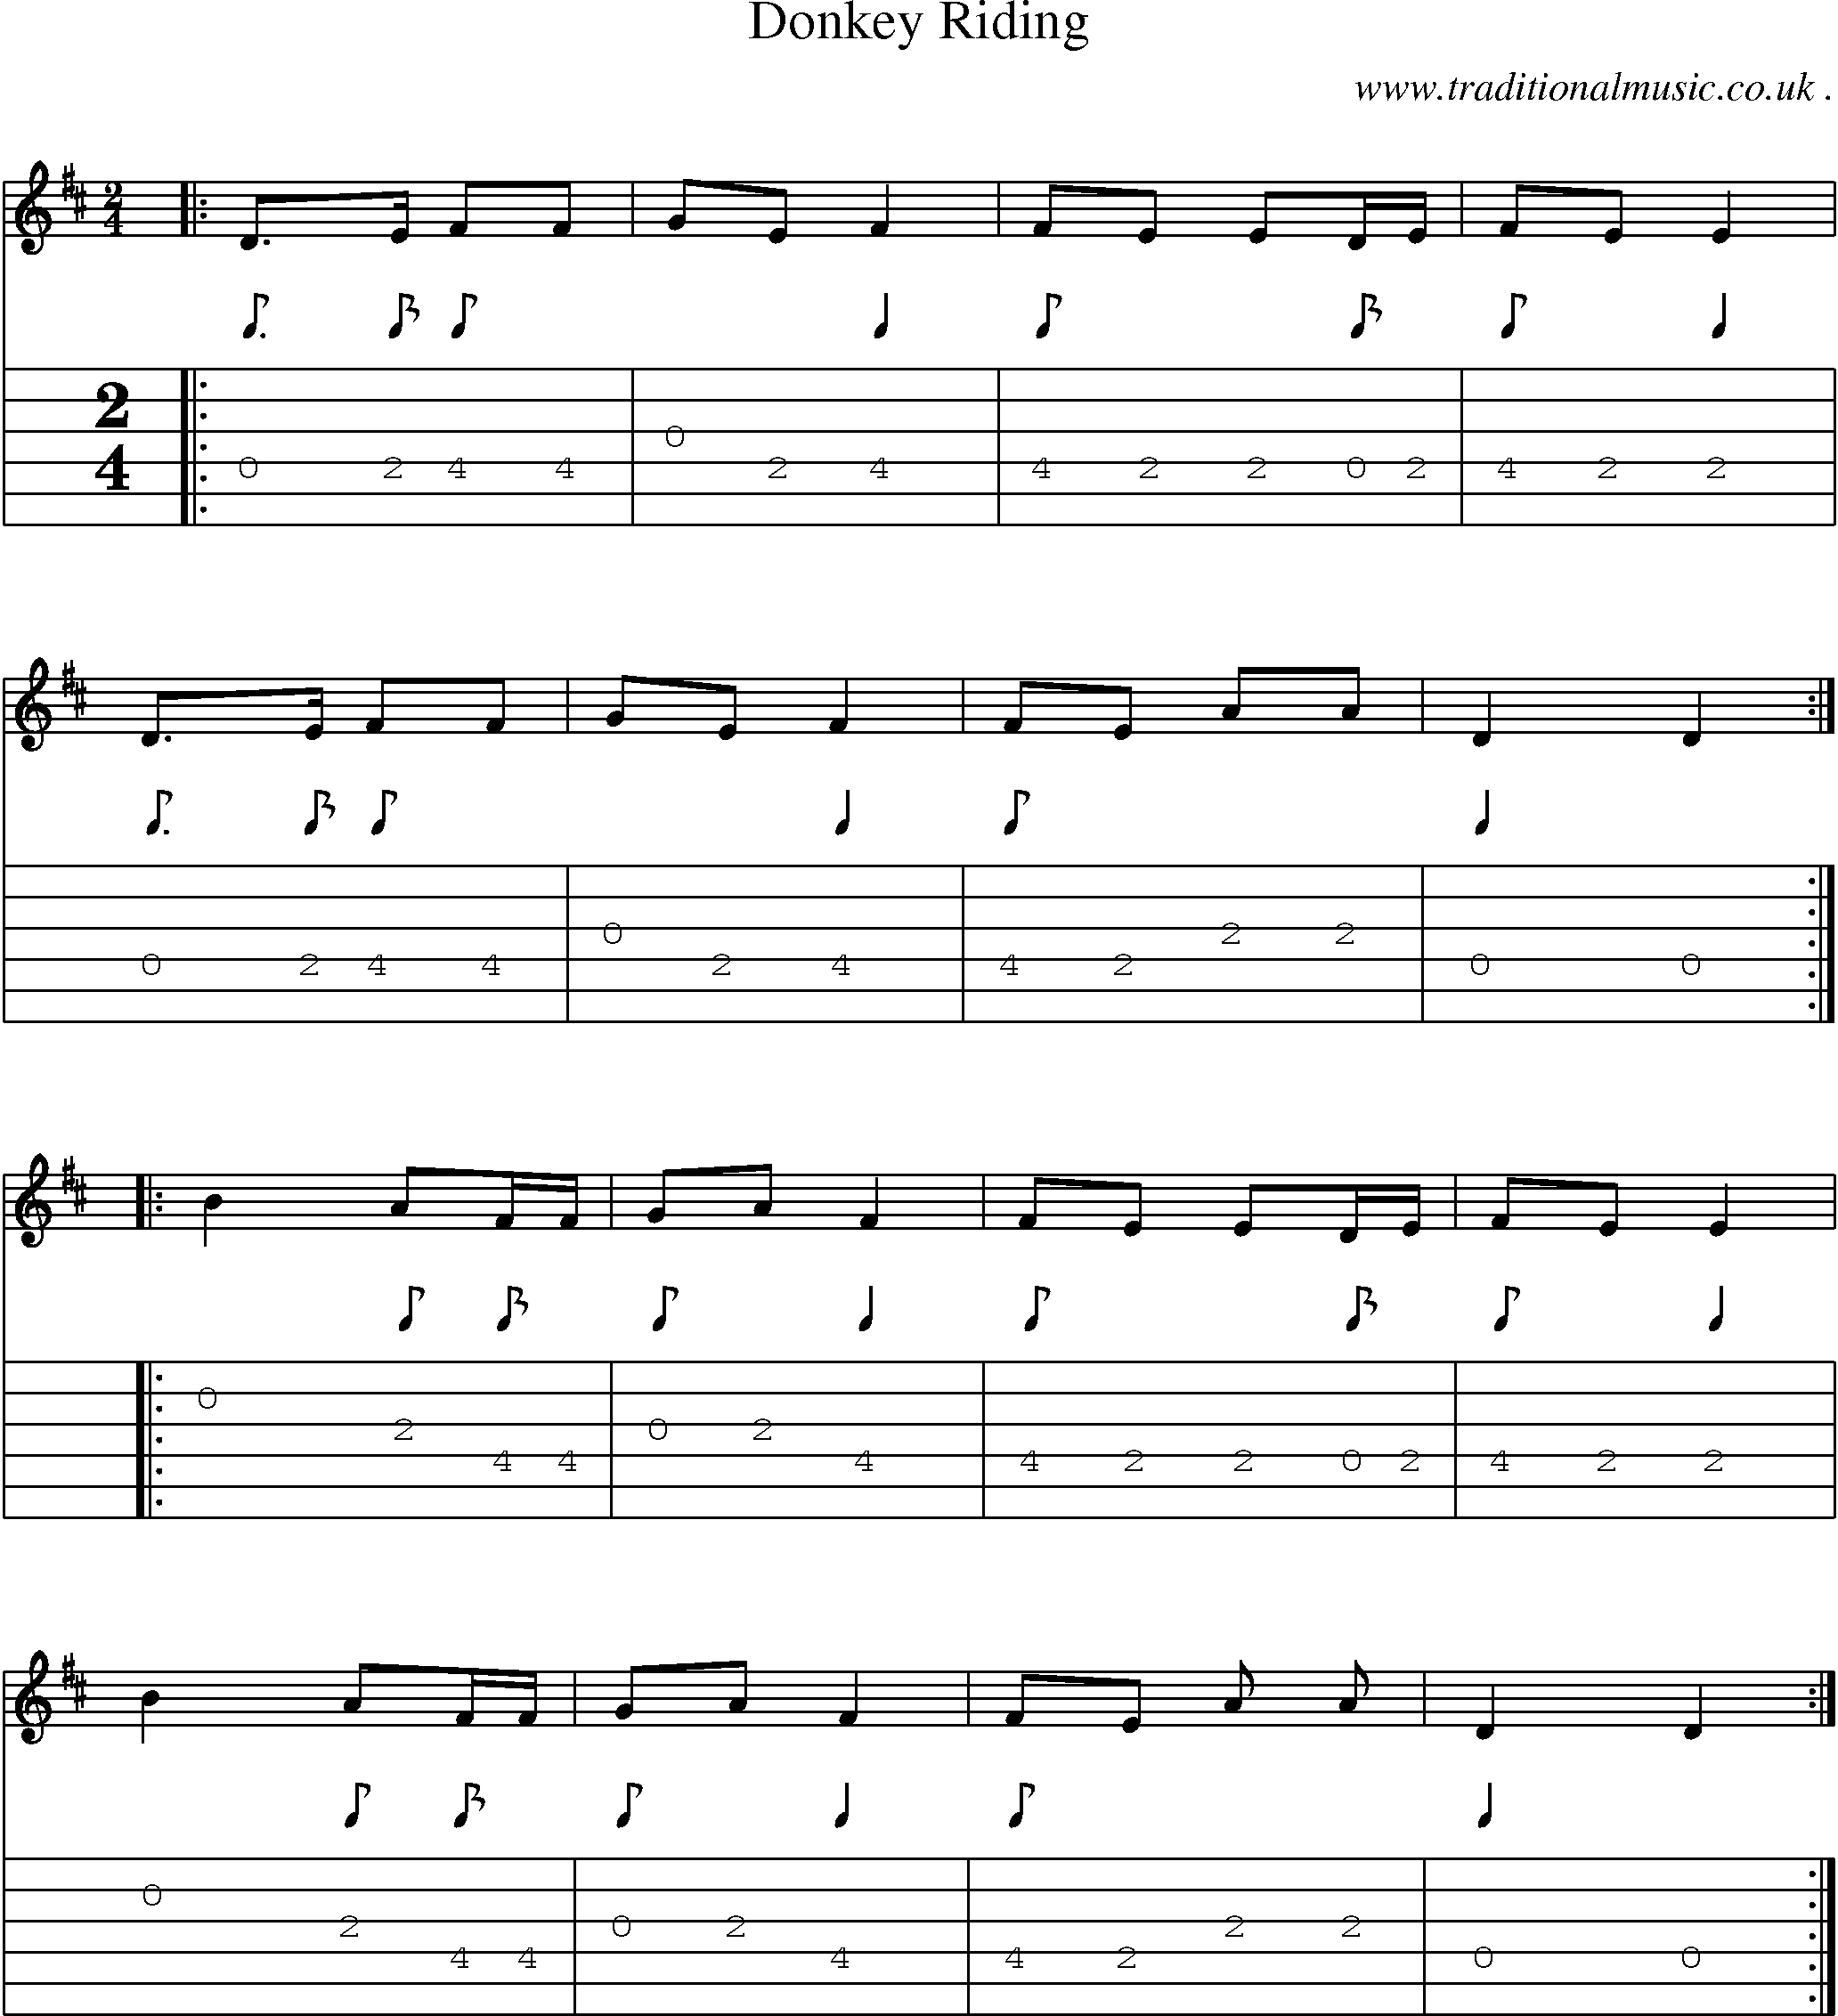 Sheet-Music and Guitar Tabs for Donkey Riding